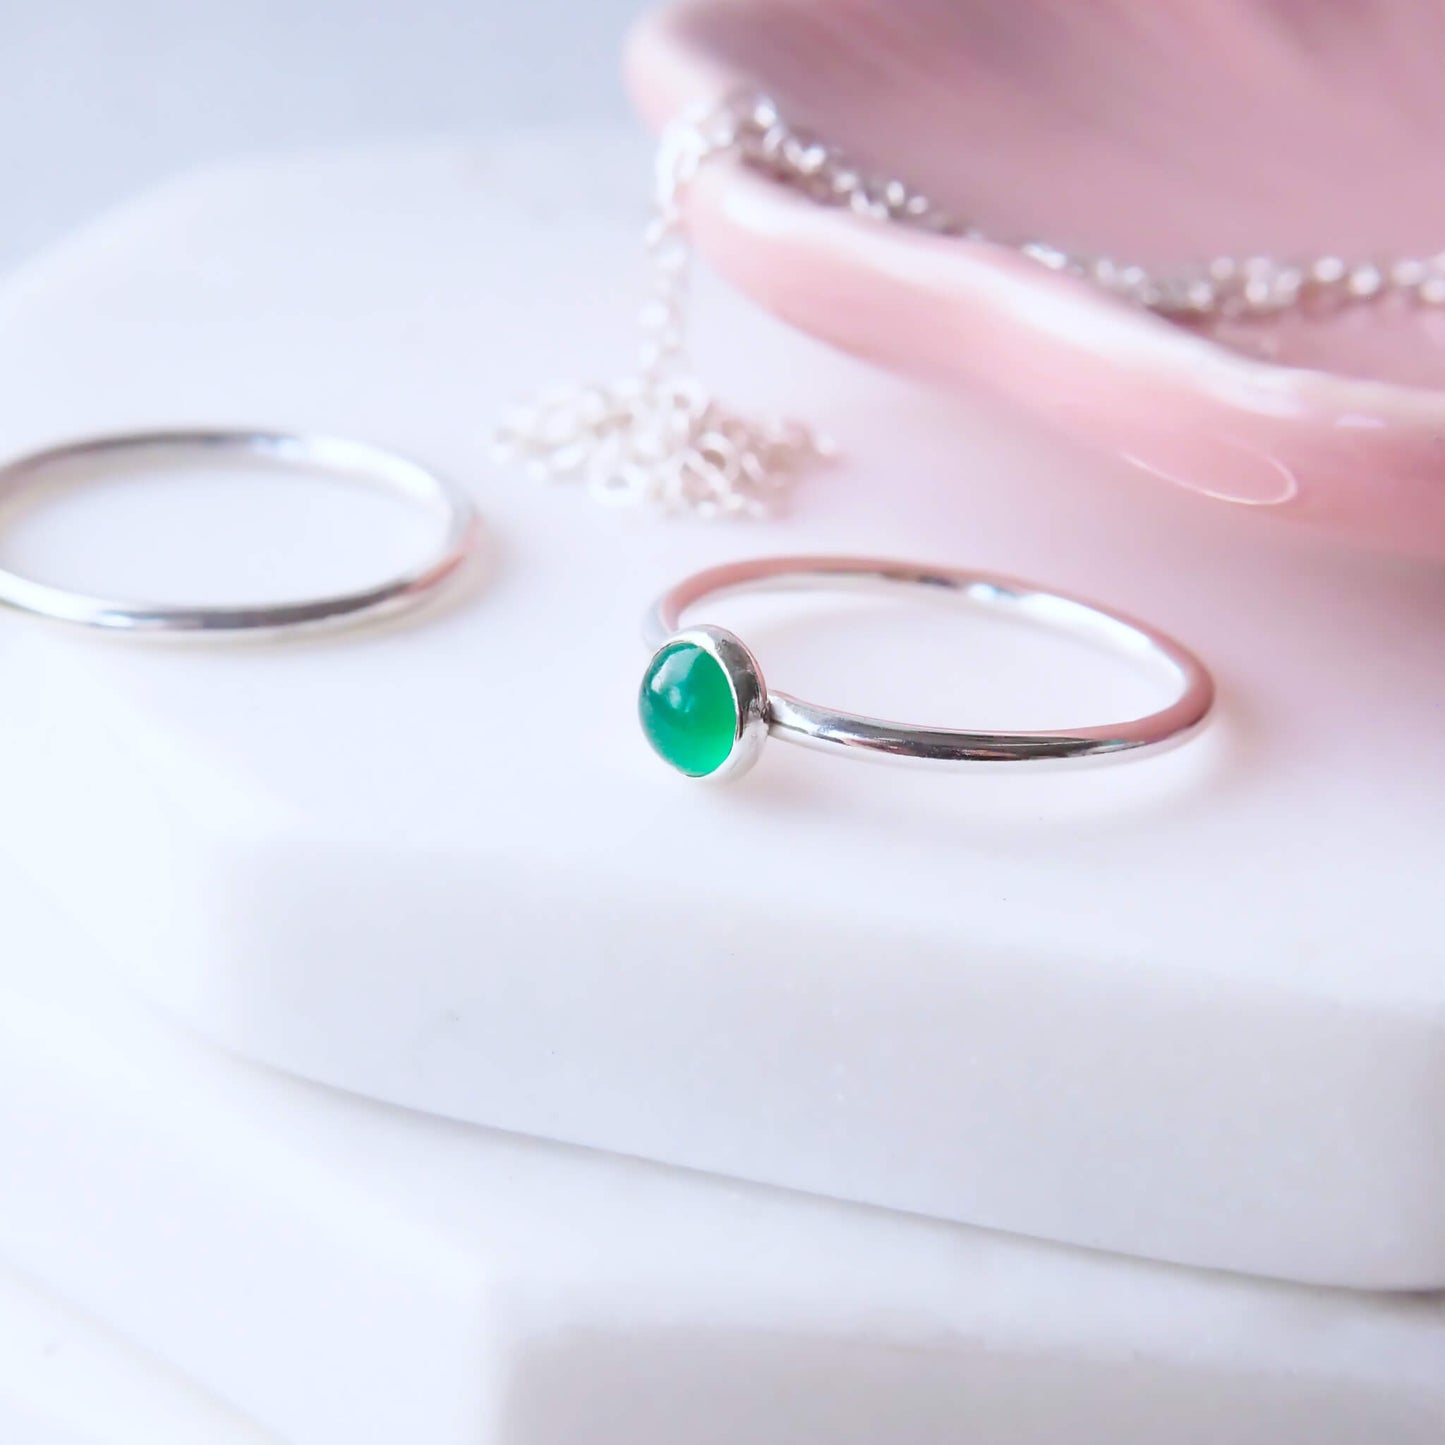 Green Agate Birthstone Ring for May. A round 5mm Emerald Green Agate Cabochon set onto a simple band of Sterling Silver. Handmade to your ring size by maram jewellery in UK